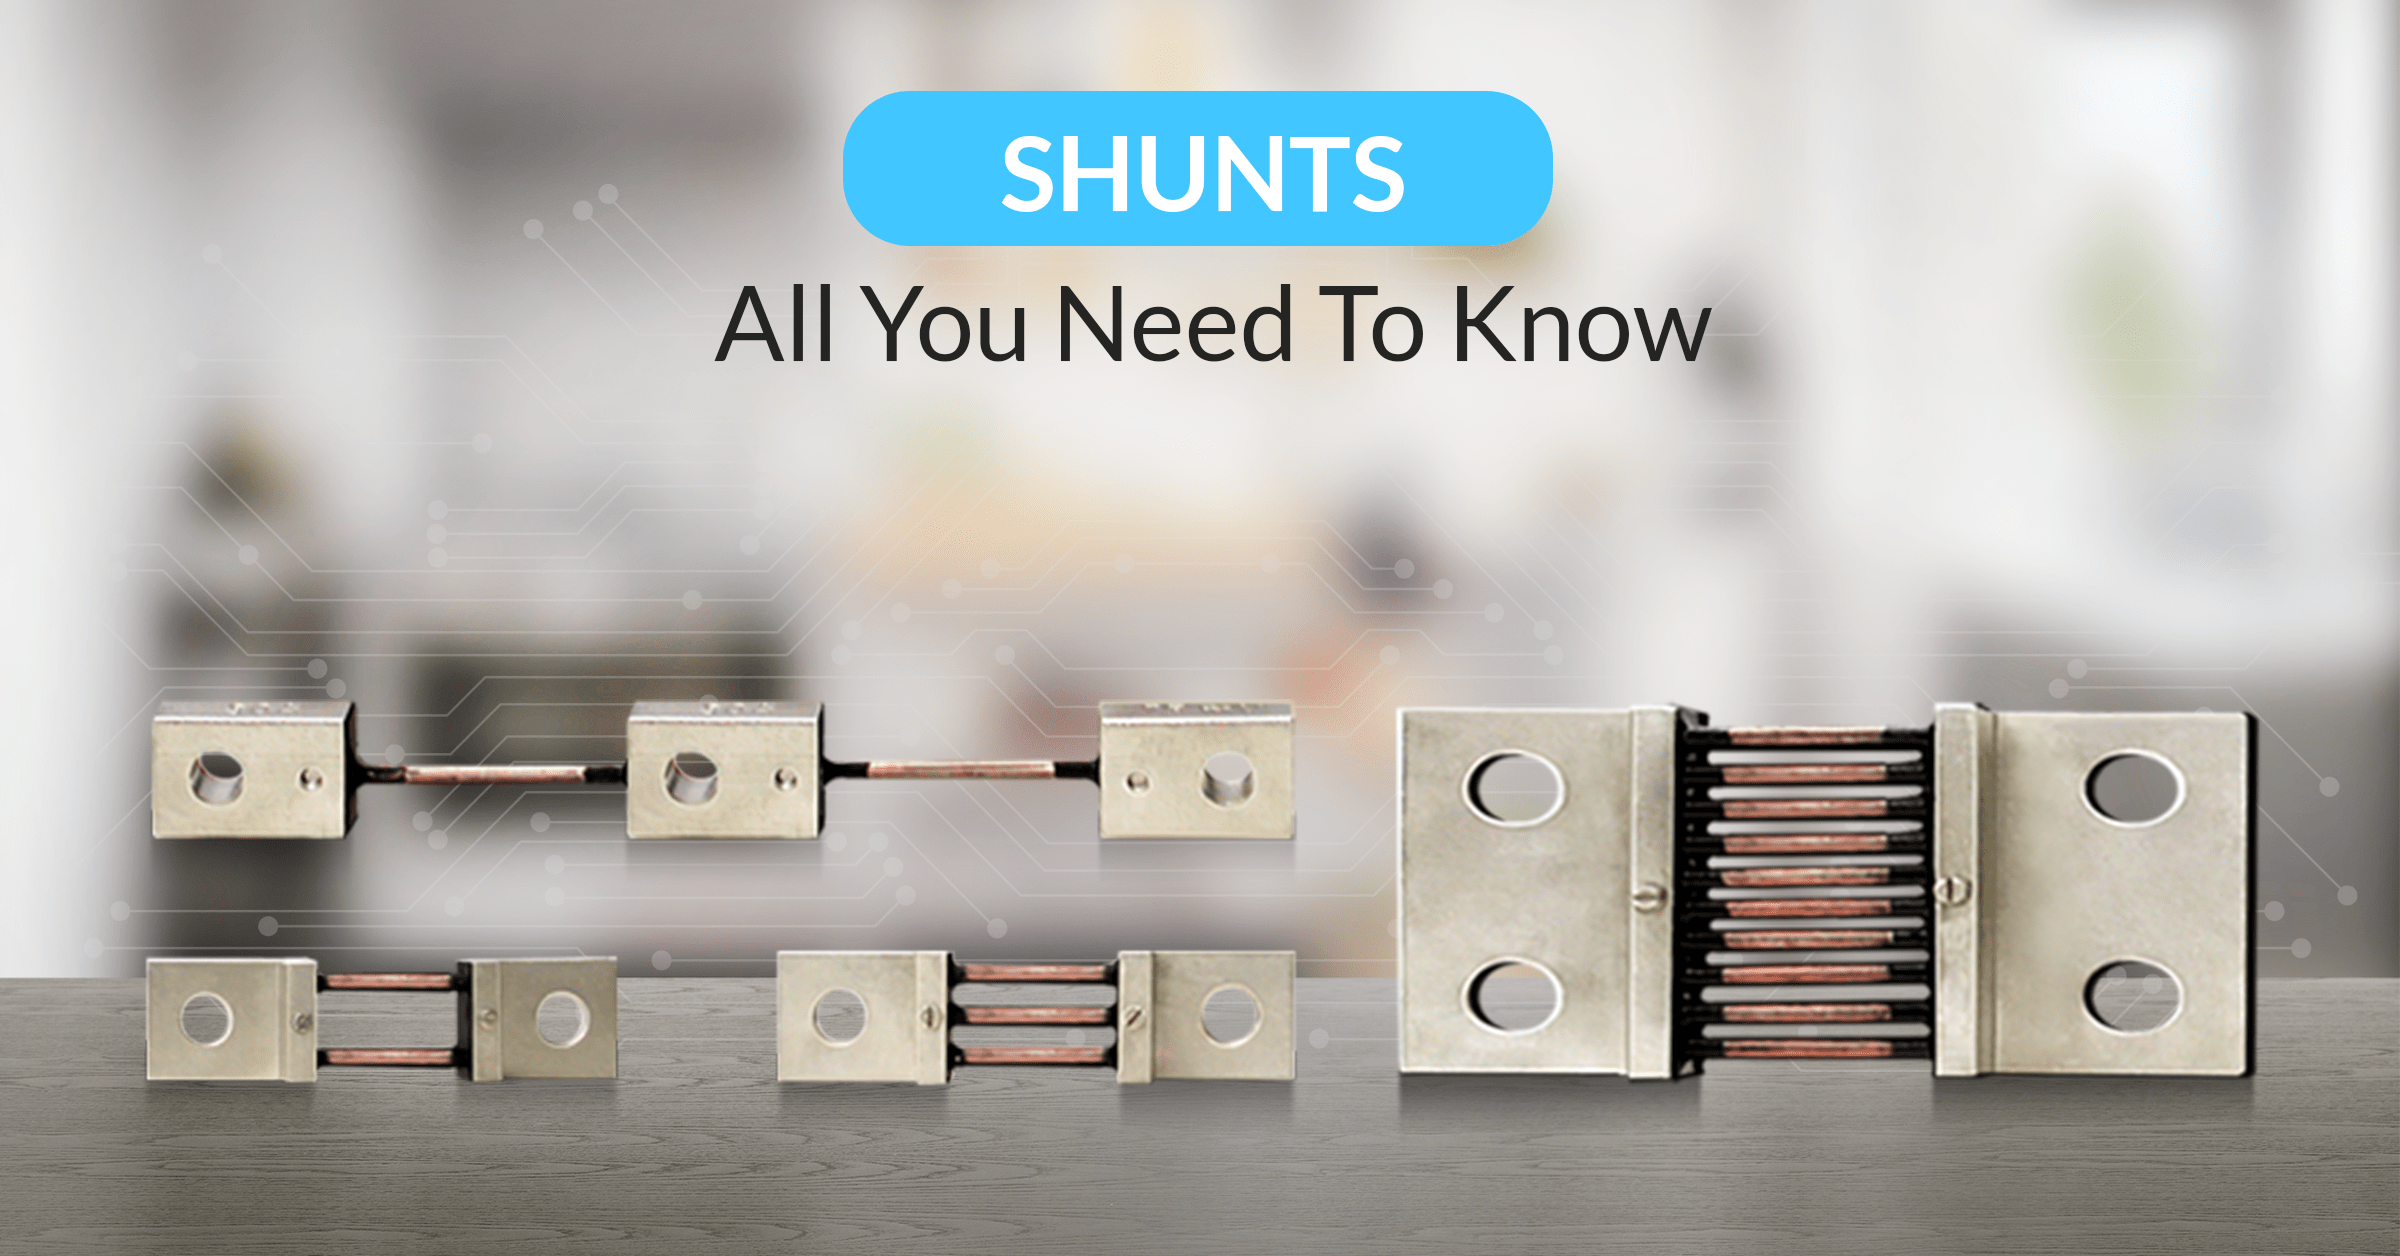 Feature image for our blog on Shunts - all you need to know